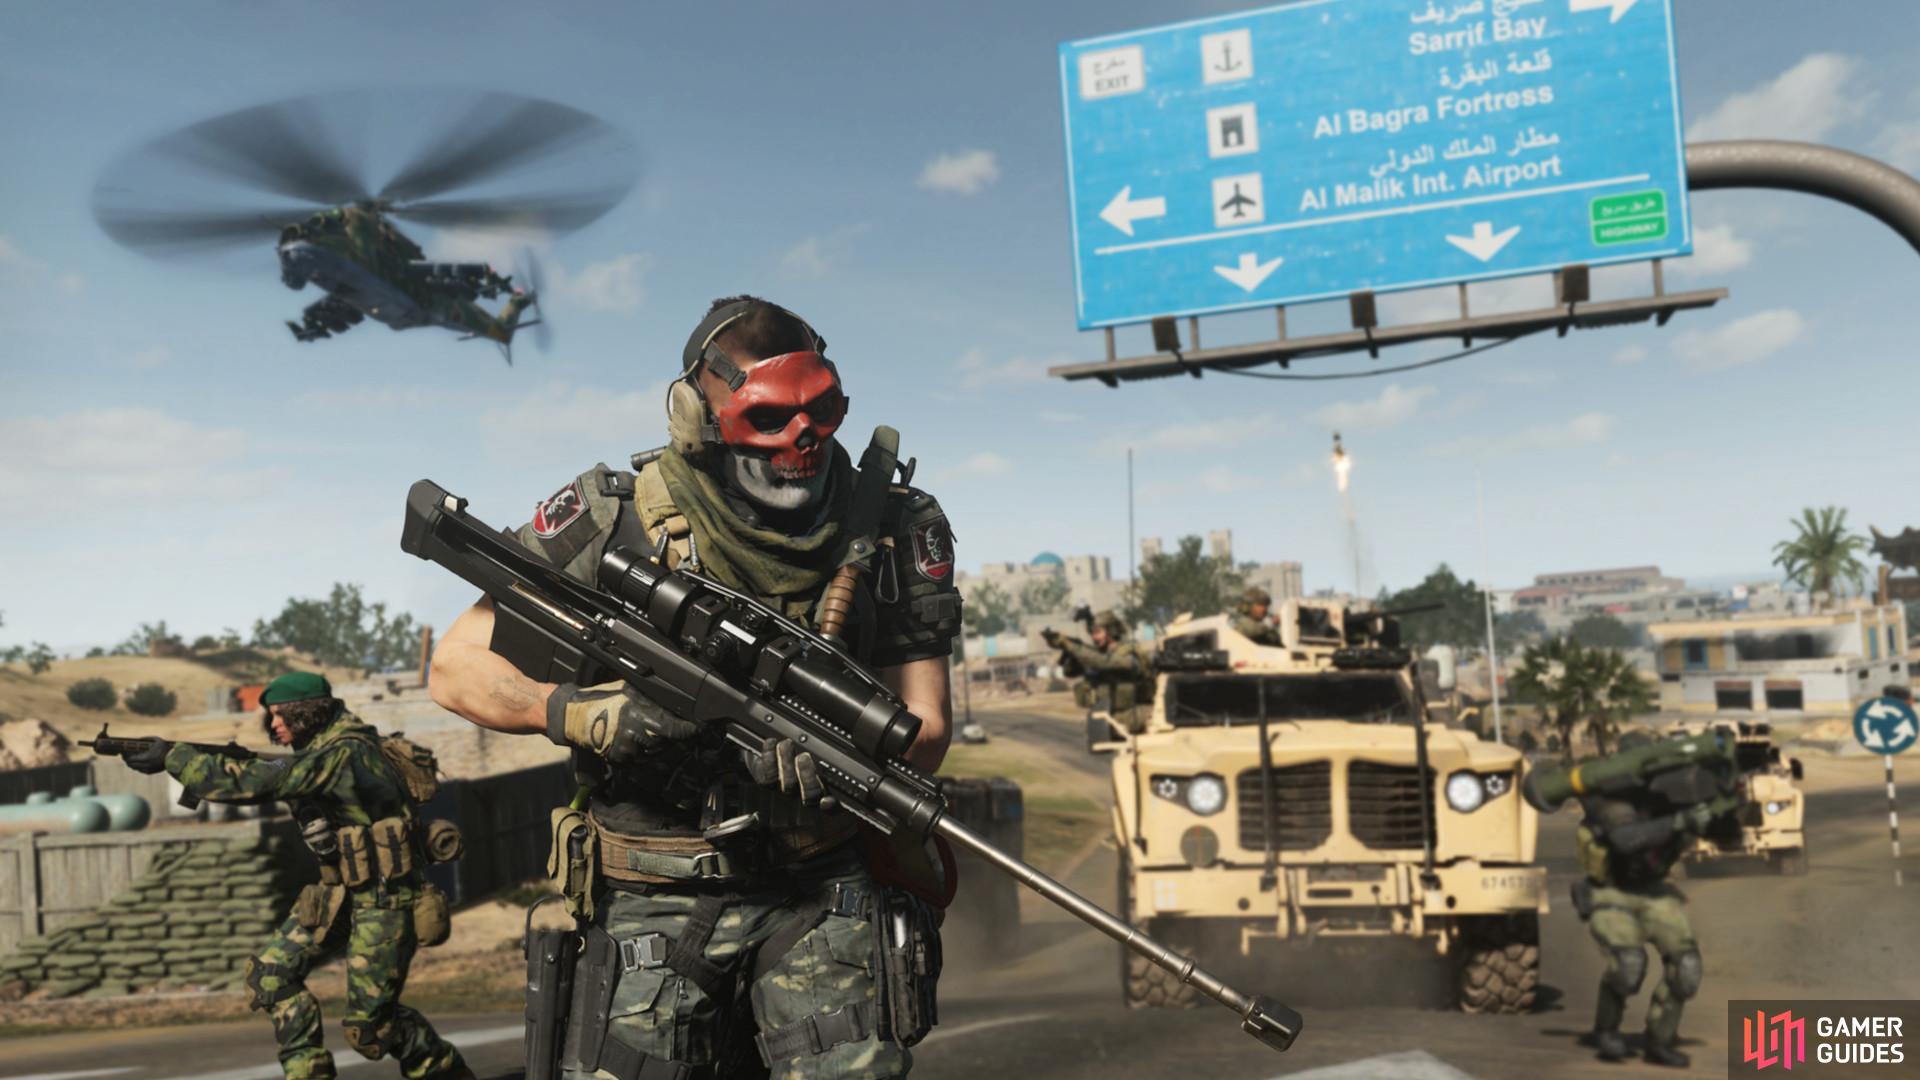 Soap’s playable multiplayer character is considered an Operator, as are many more. Image via Activision.